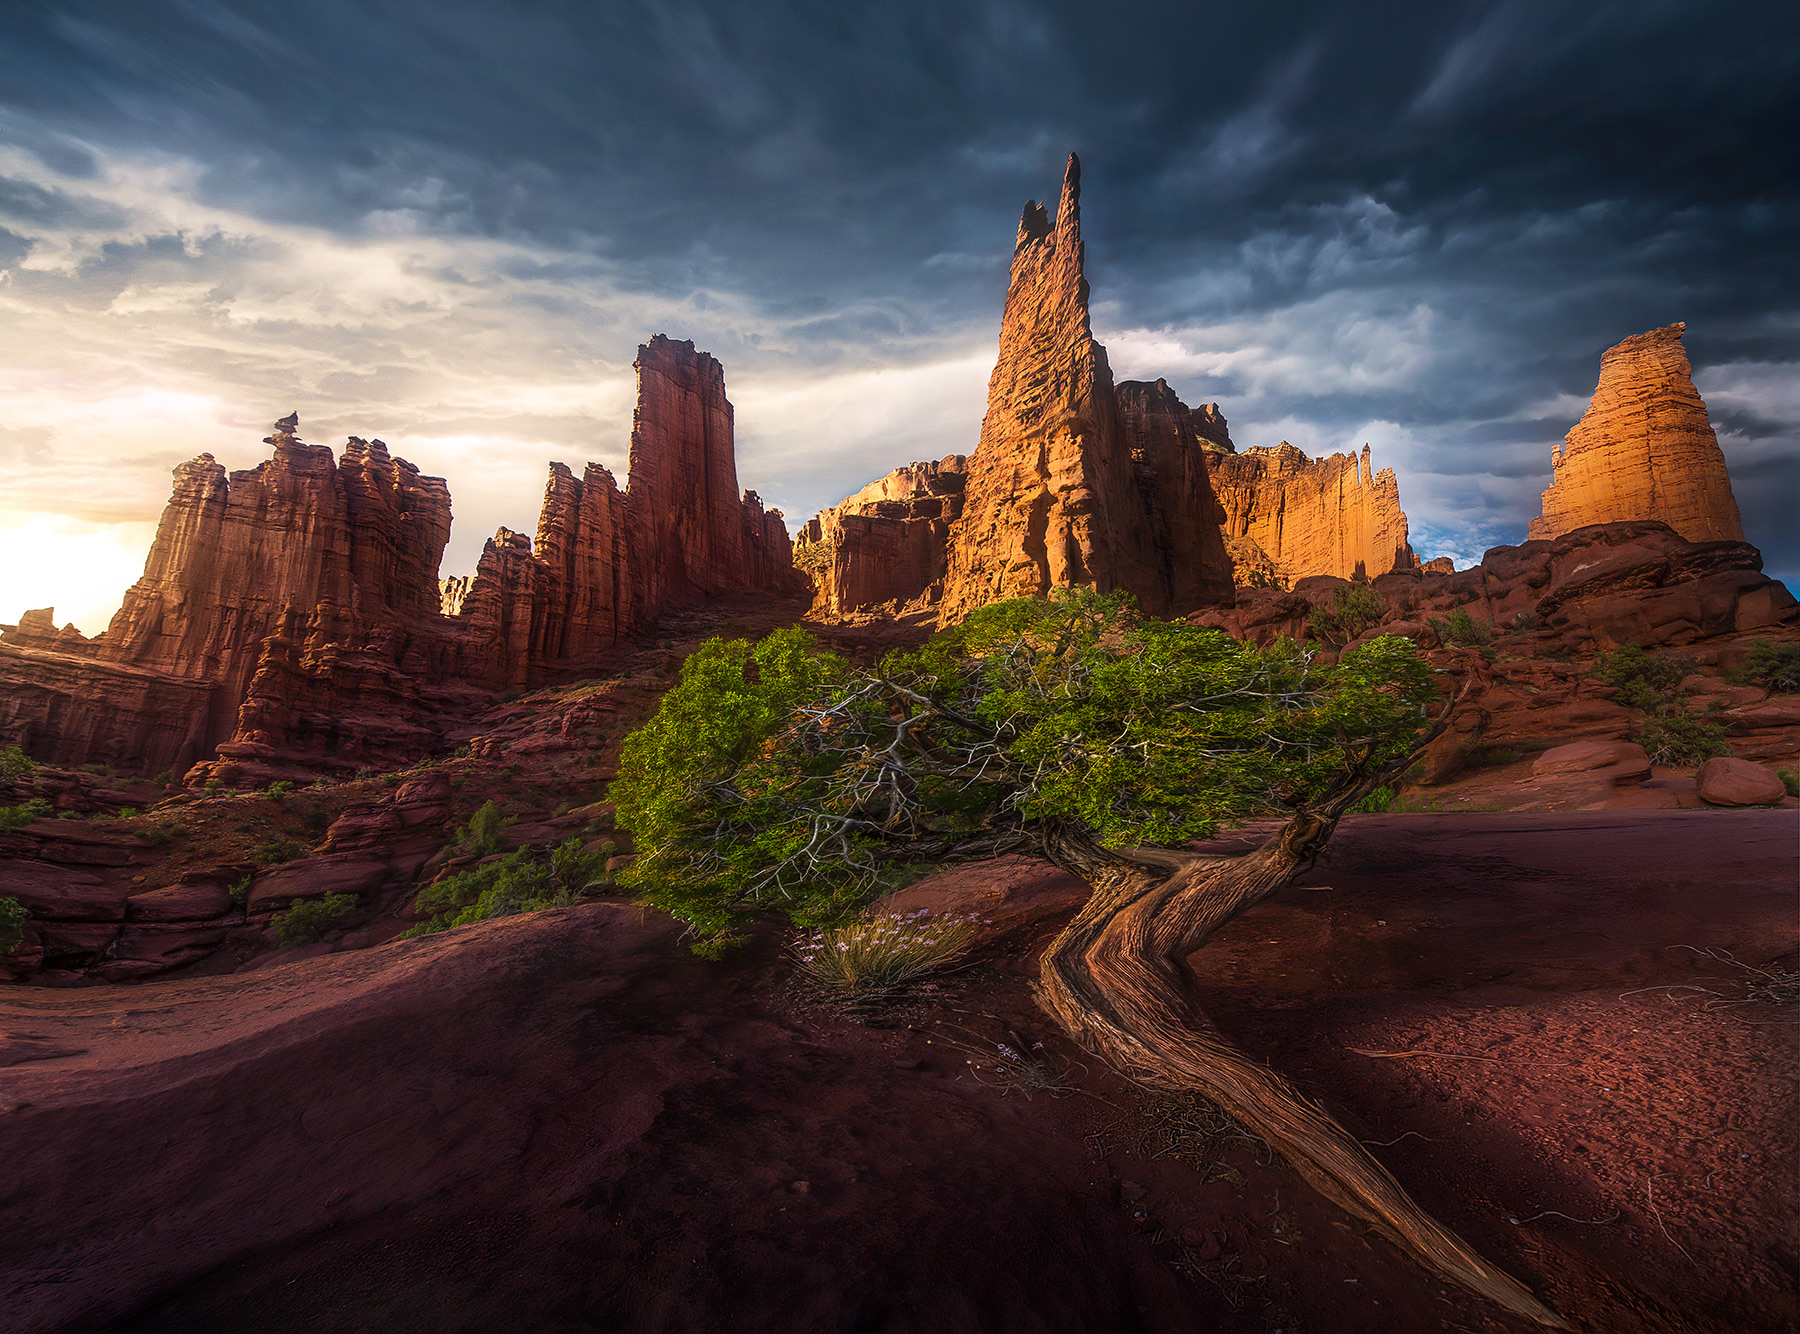 A panoramic view of amazing thousand-foot high towers of golden rock reaching for the sky under the storm.  A lone juniper reaches...